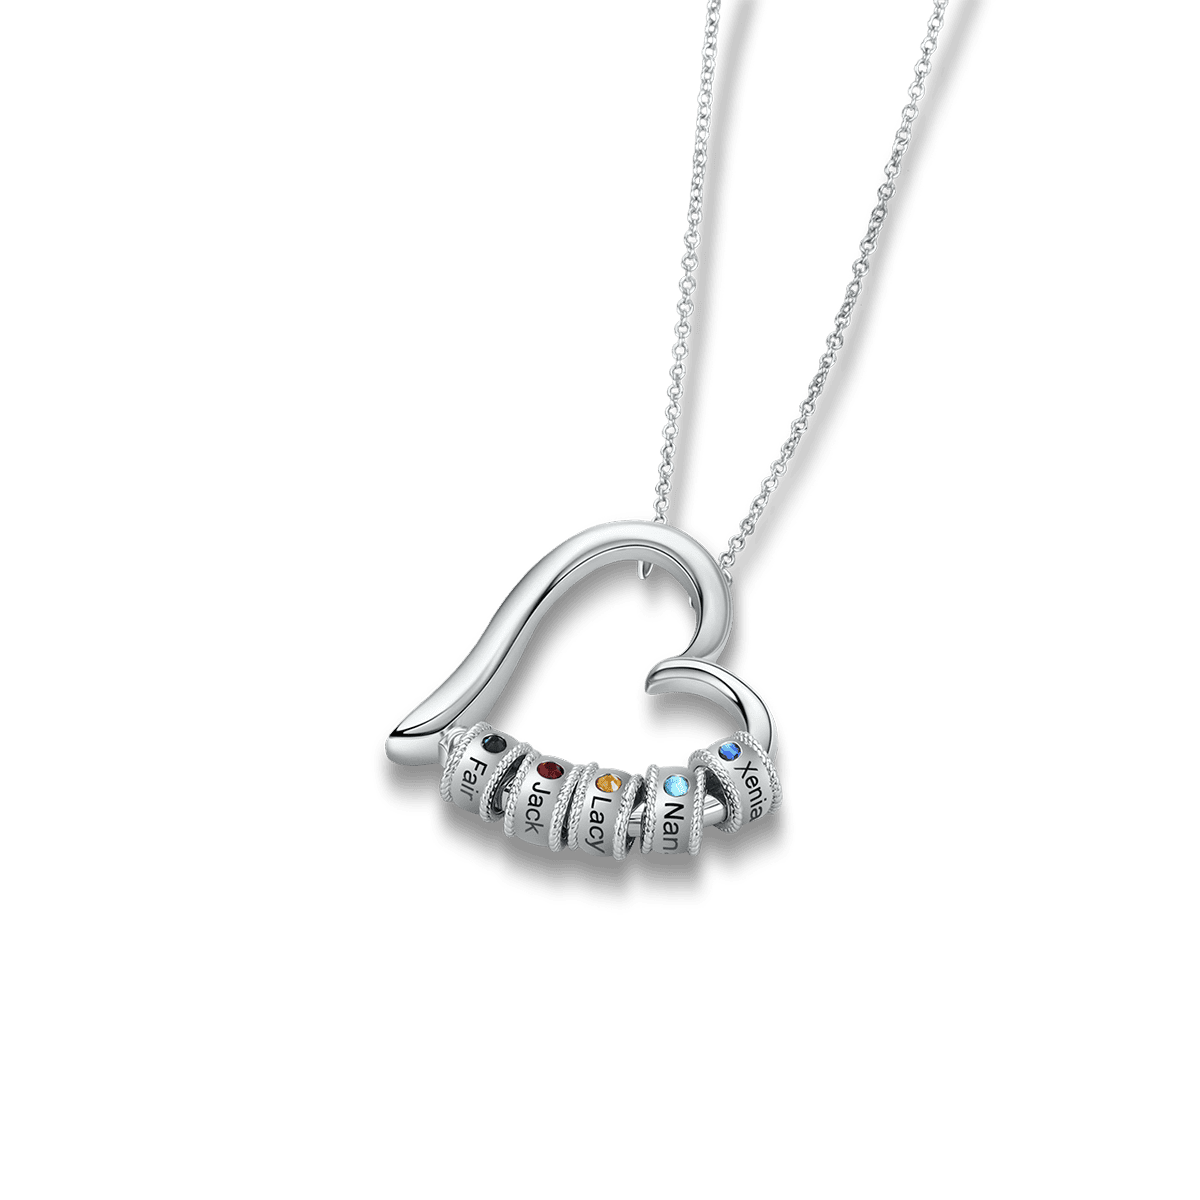 Personalized Family Heart-Shaped Birthstone Necklace with Names - Stainless Steel